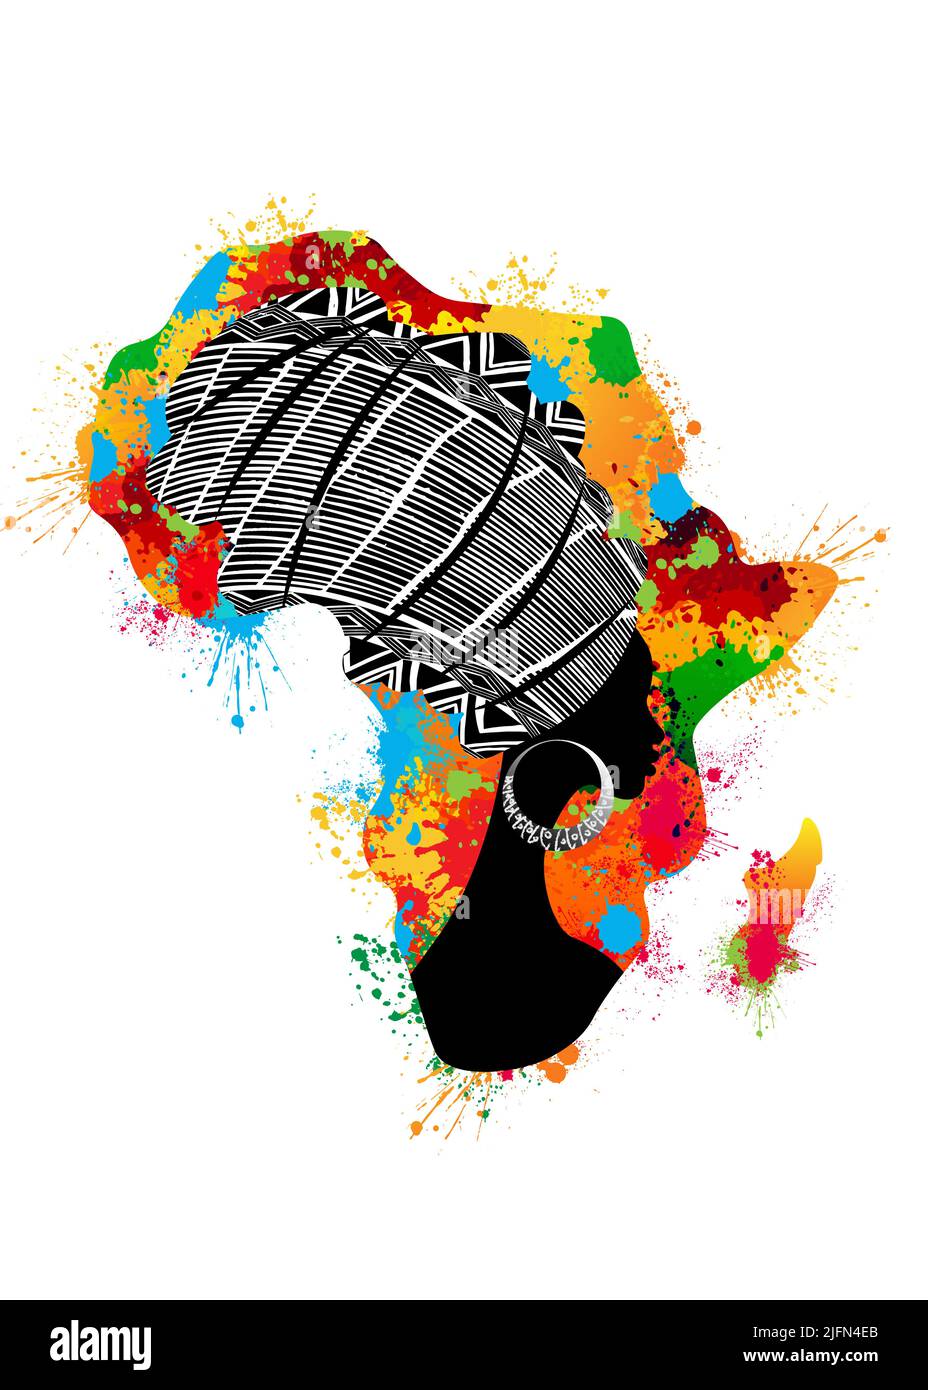 Concept of African woman, face profile silhouette with turban in the shape of a map of Africa. Colorful Afro print tribal logo splash design template. Stock Vector